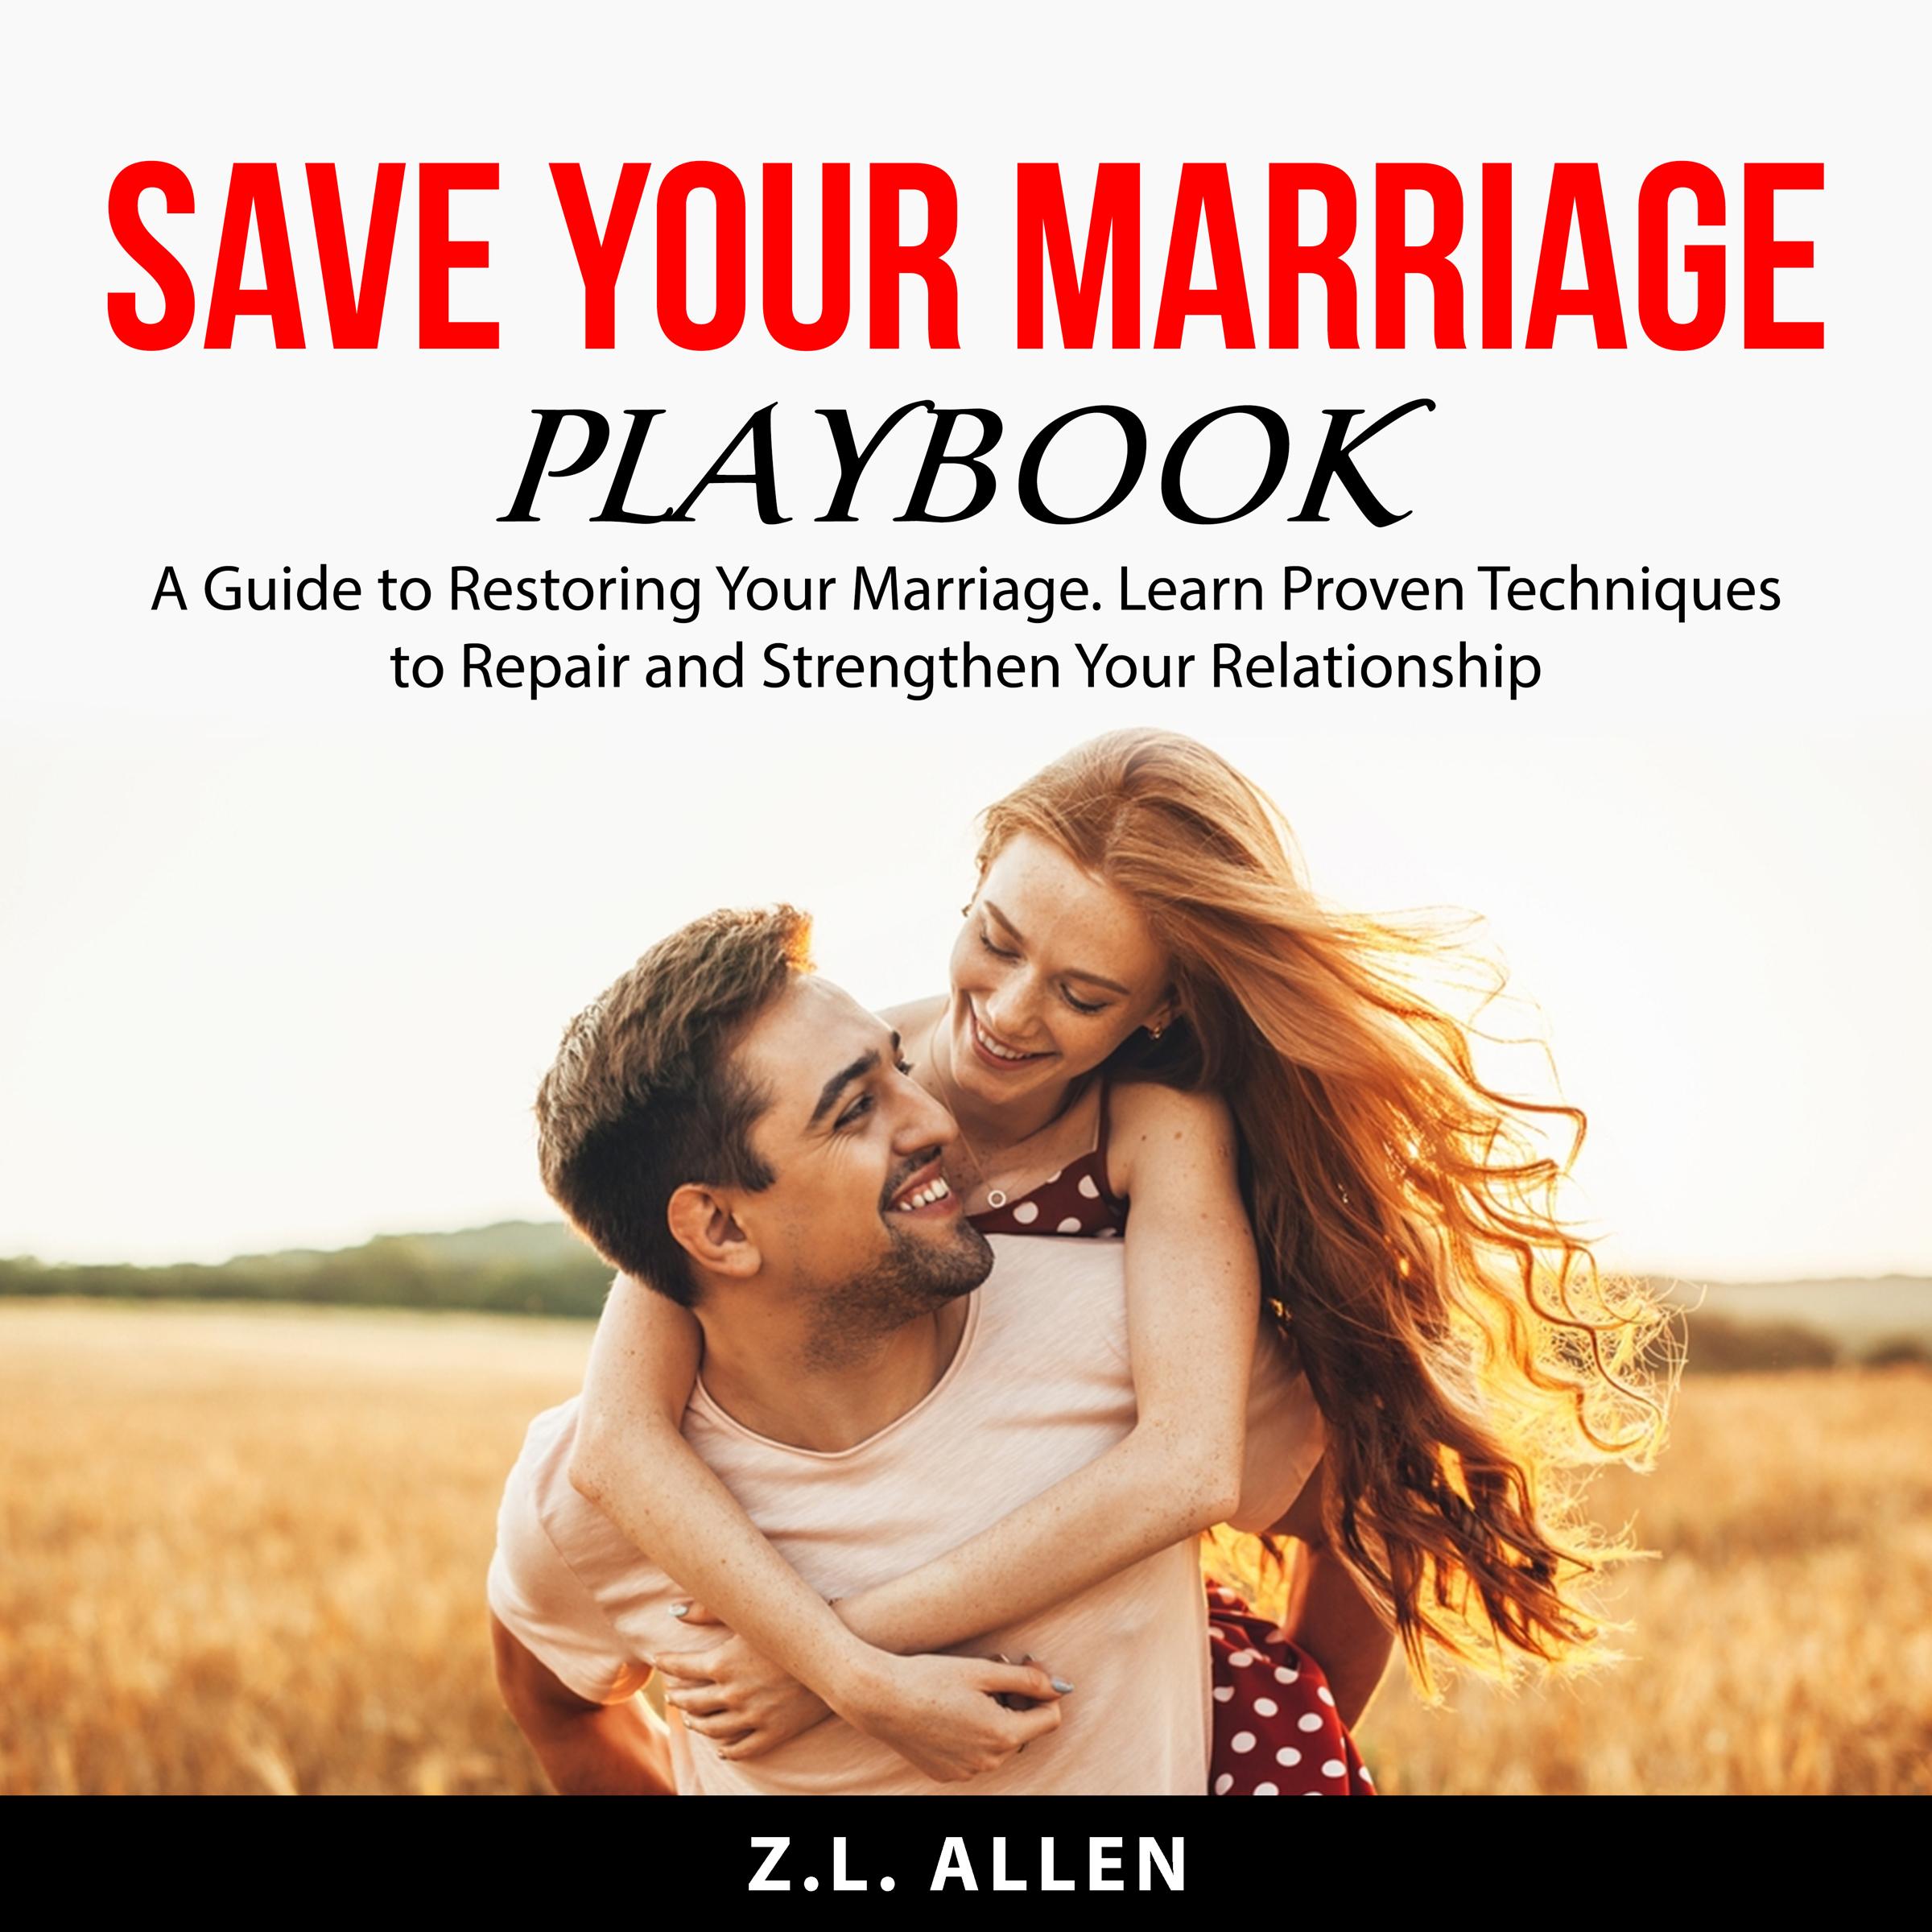 Save Your Marriage Playbook